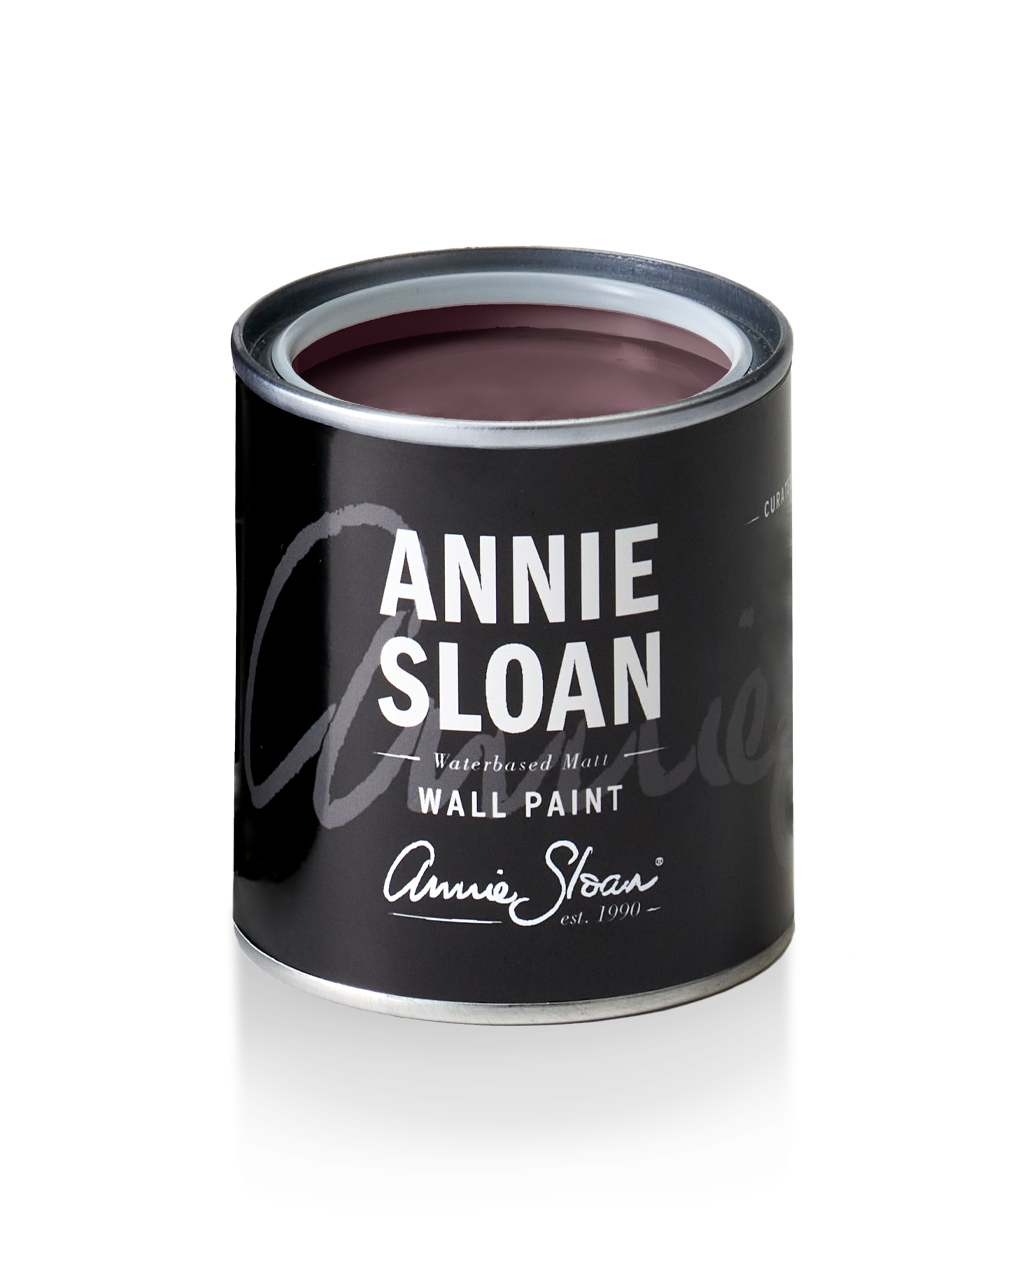 120ml of Tyrian Plum wall paint by Annie Sloan